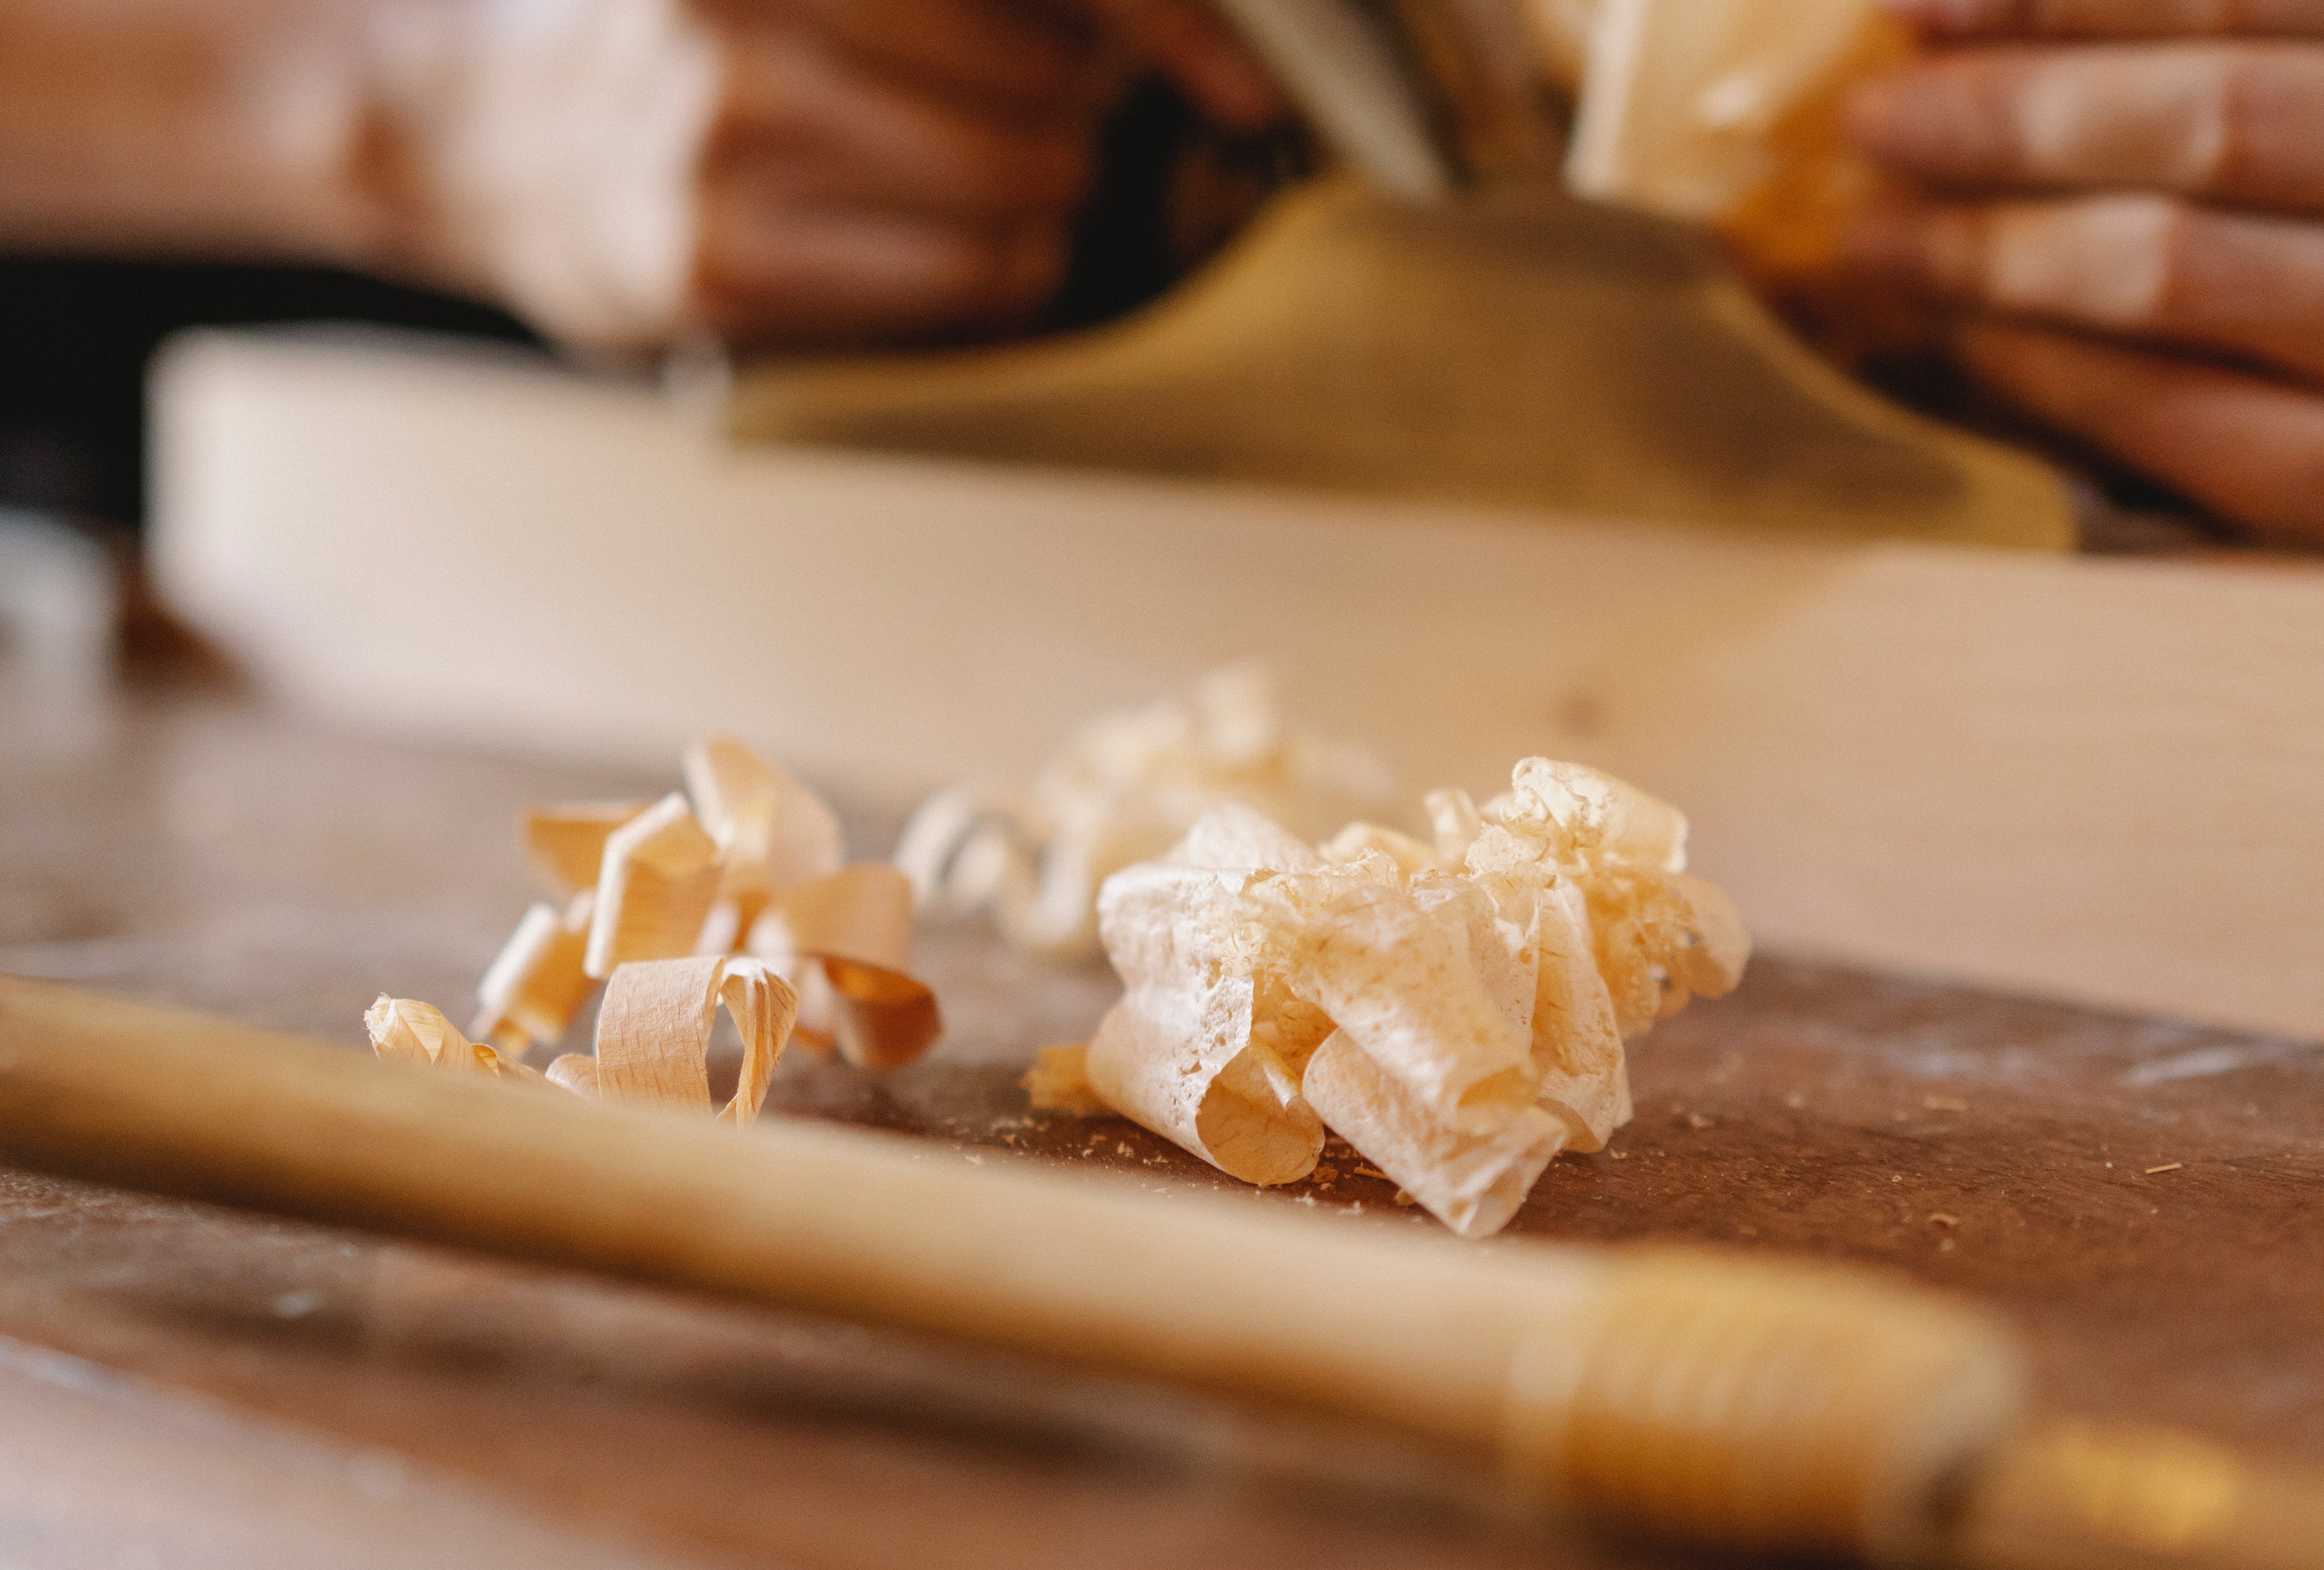 Wood shavings from crafting kitchenware